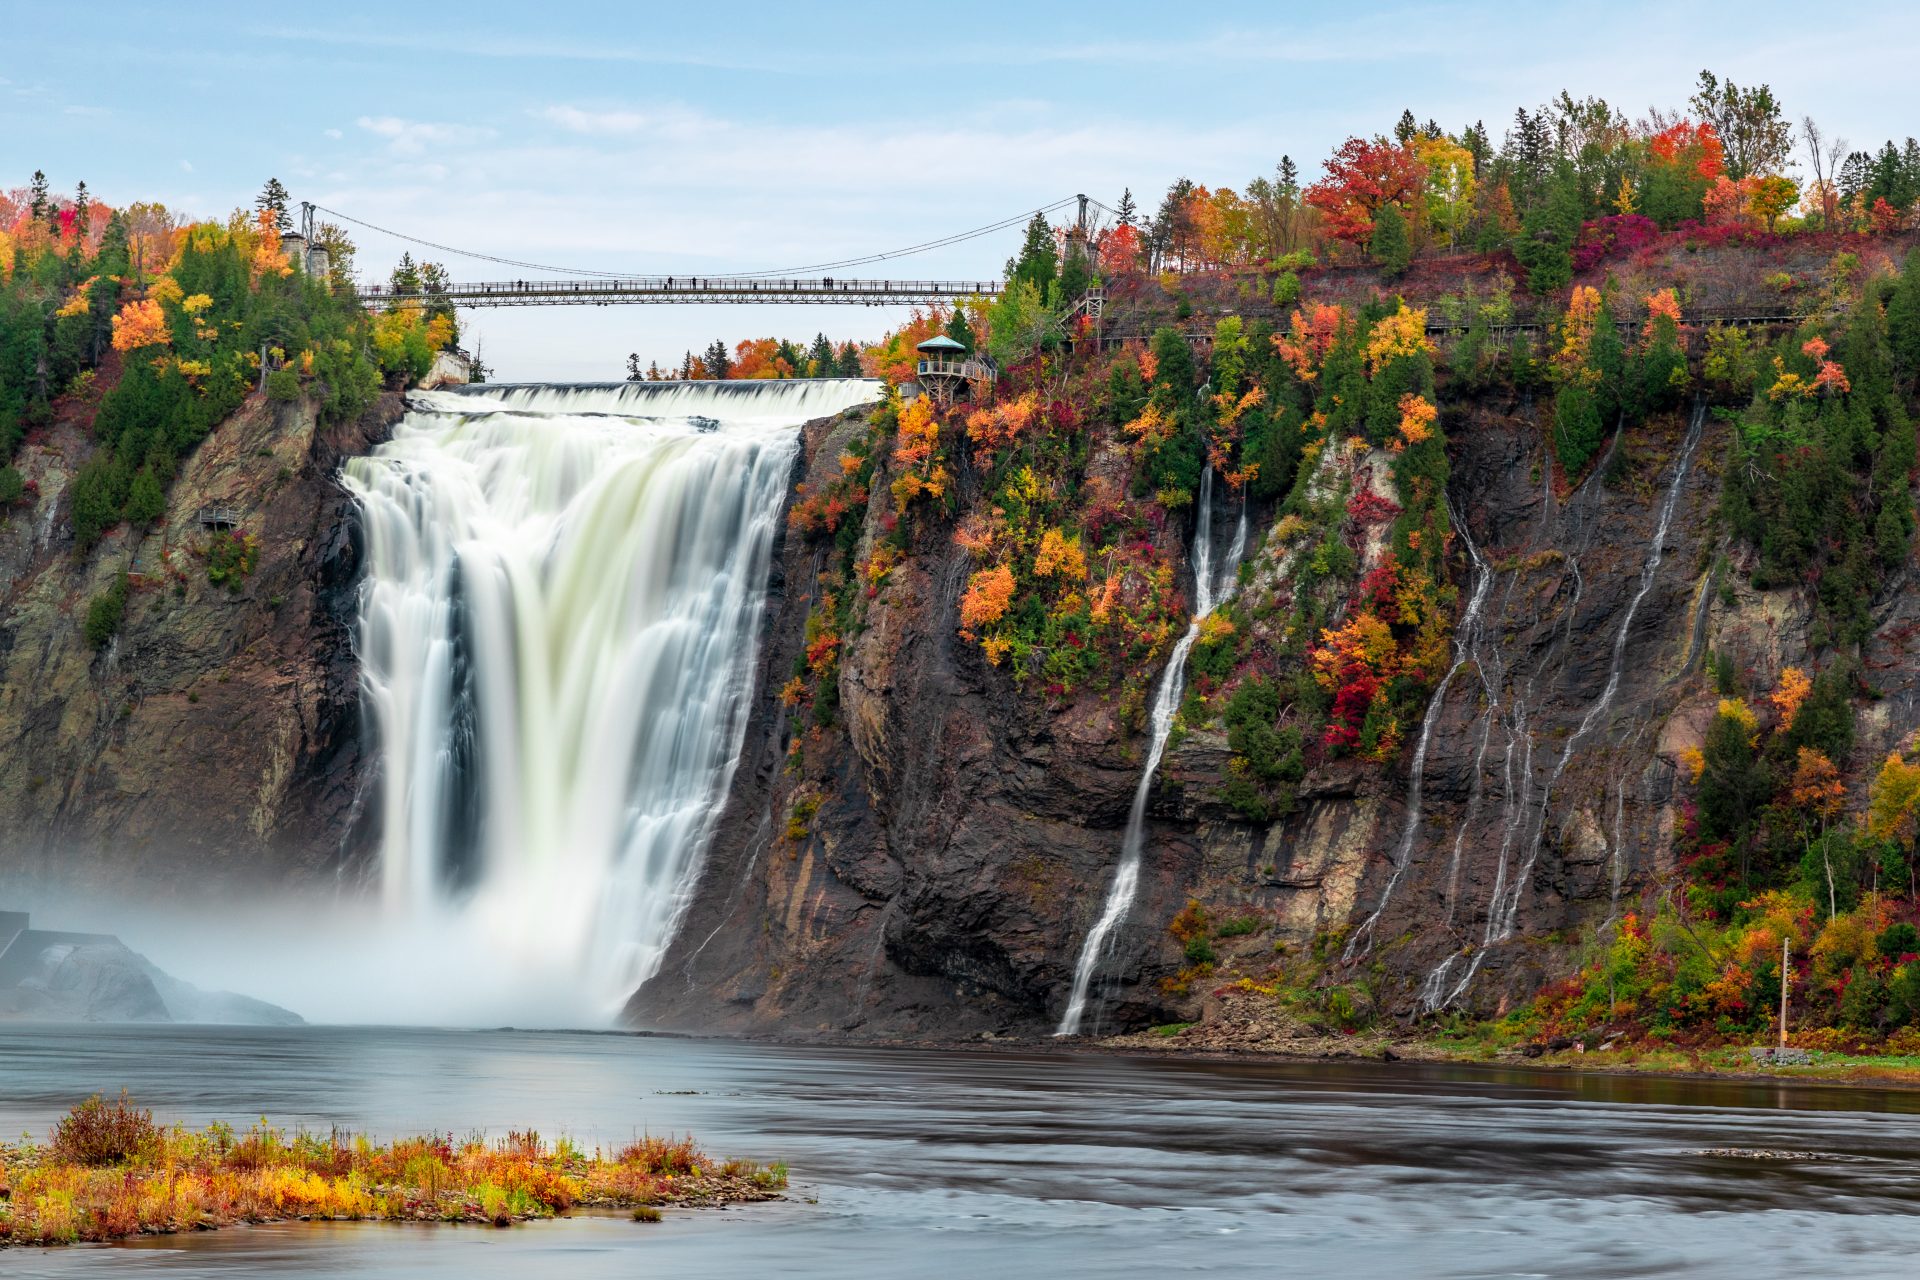 Montmorency Falls and Bridge in autumn with colorful trees